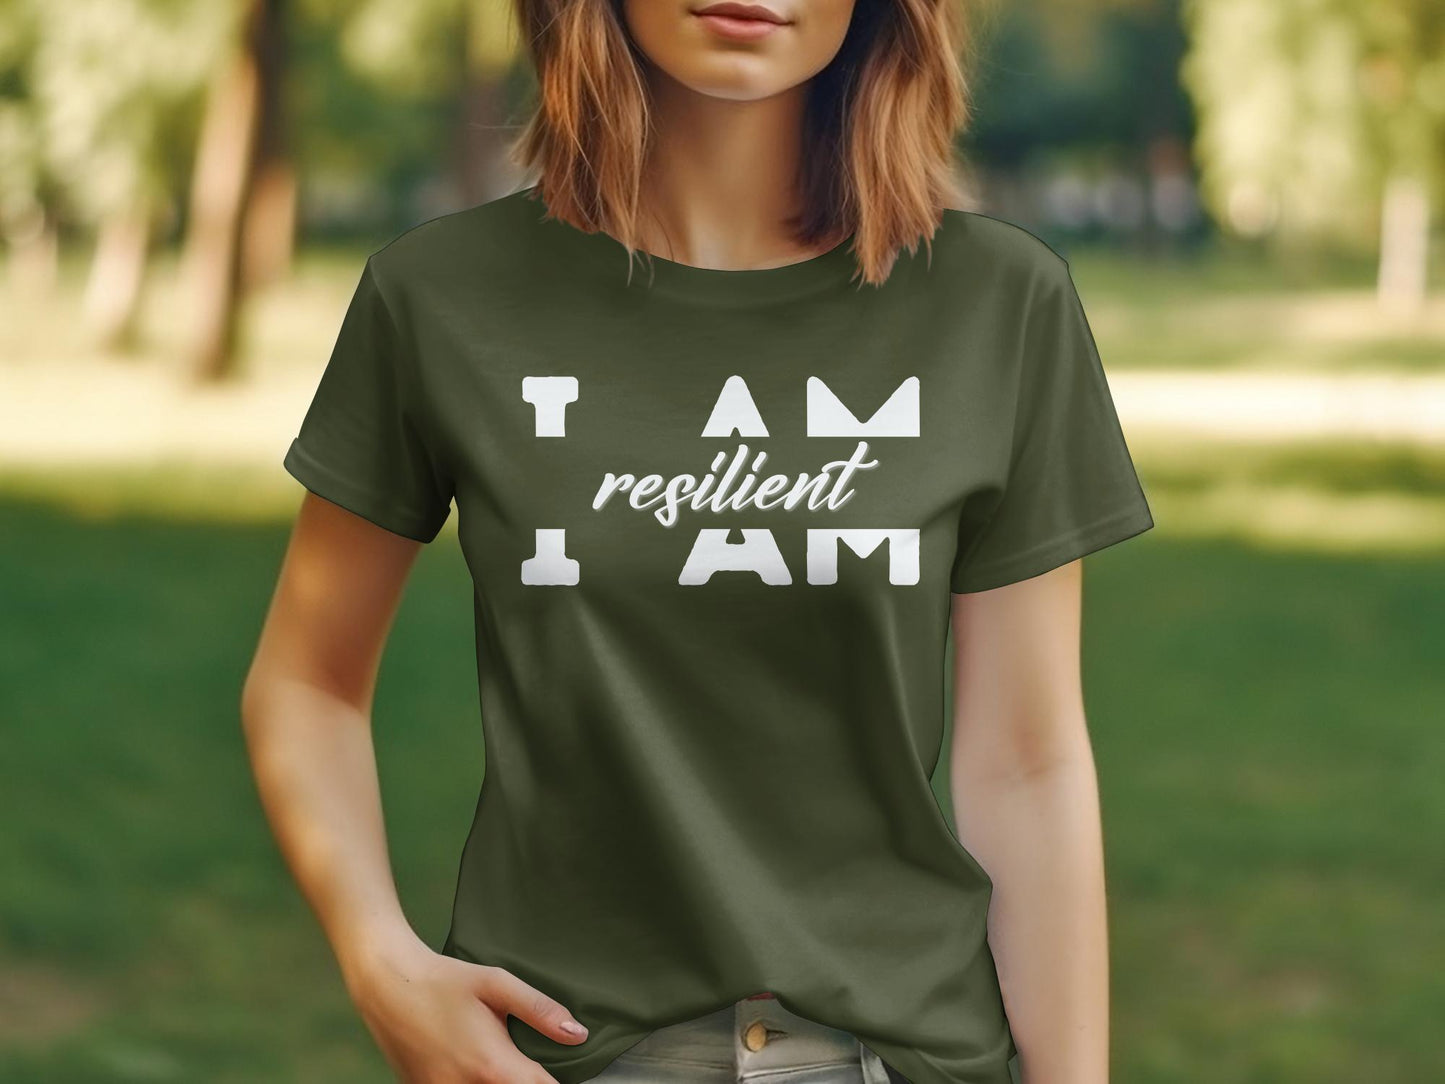 I Am Resilient - An encouraging and motivating Affirmation Quote T-shirt.